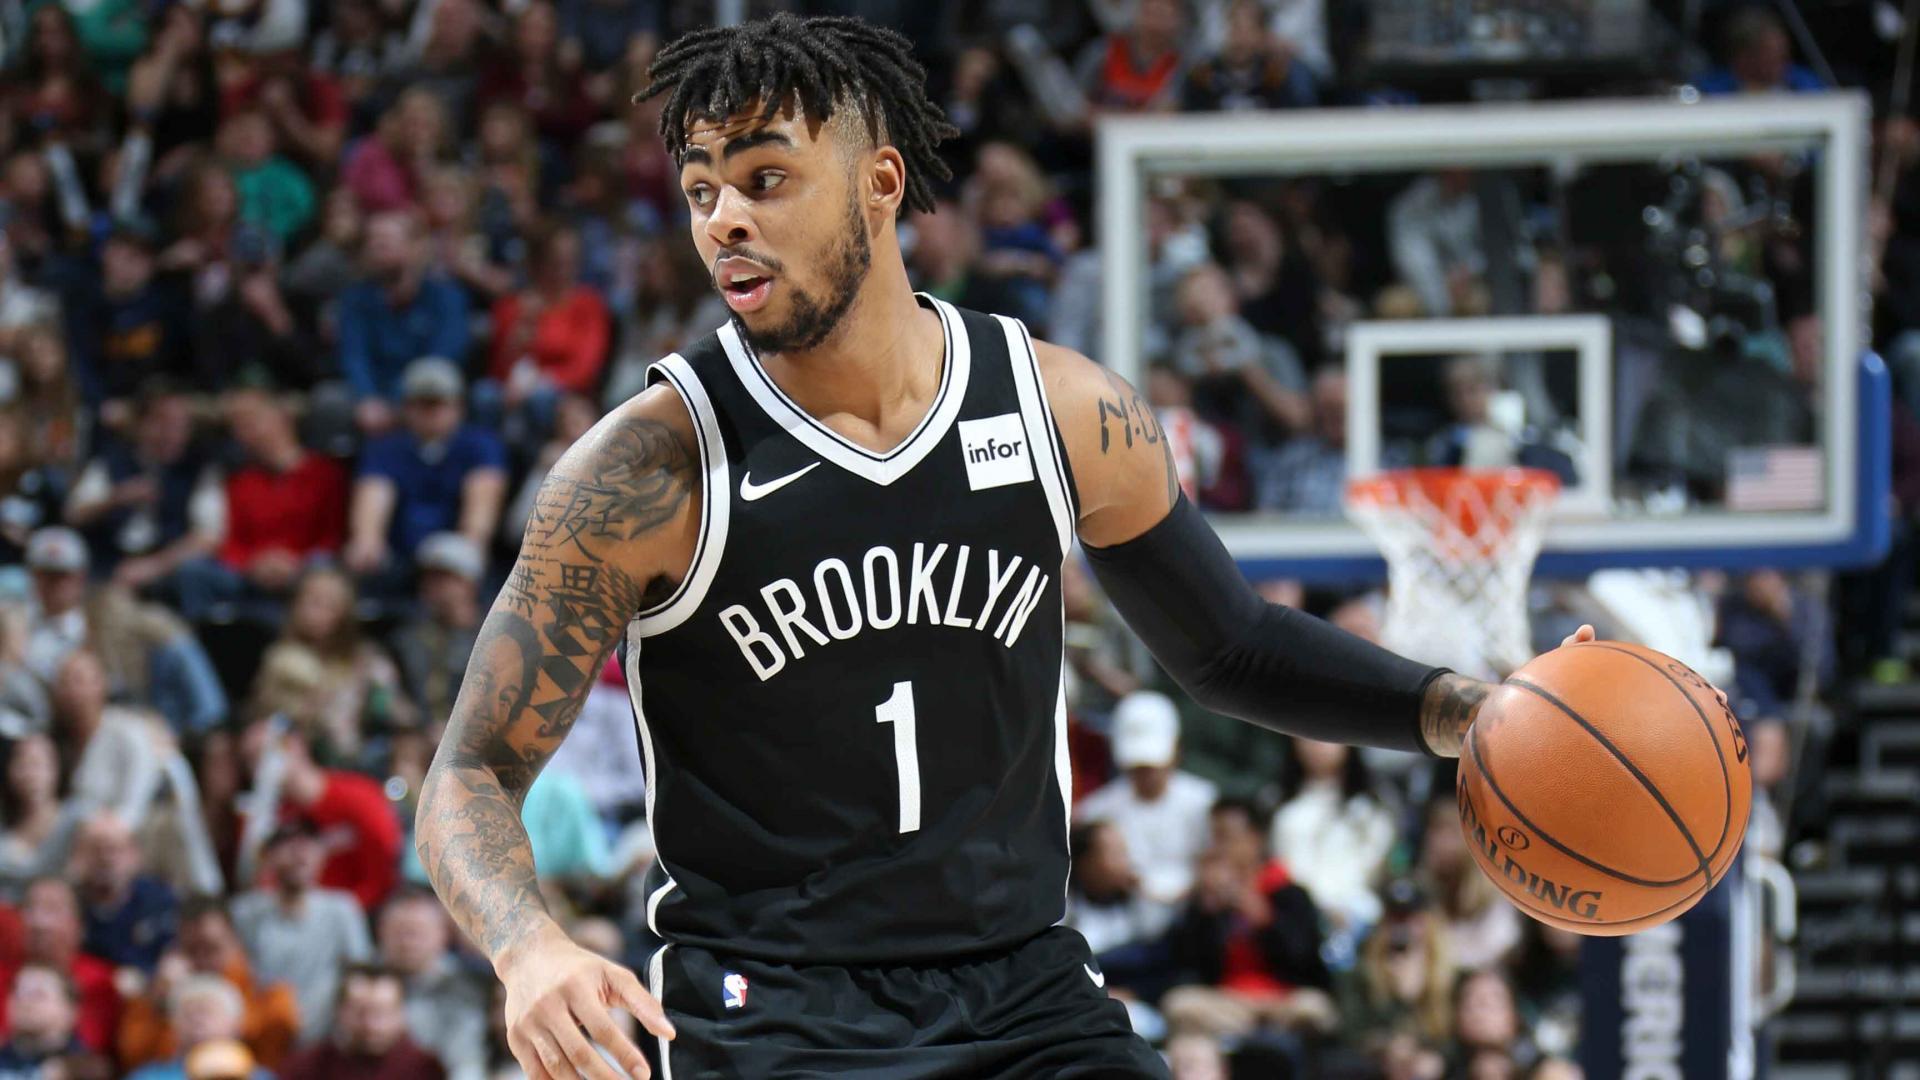 Report: Brooklyn Nets' D'Angelo Russell to miss several games